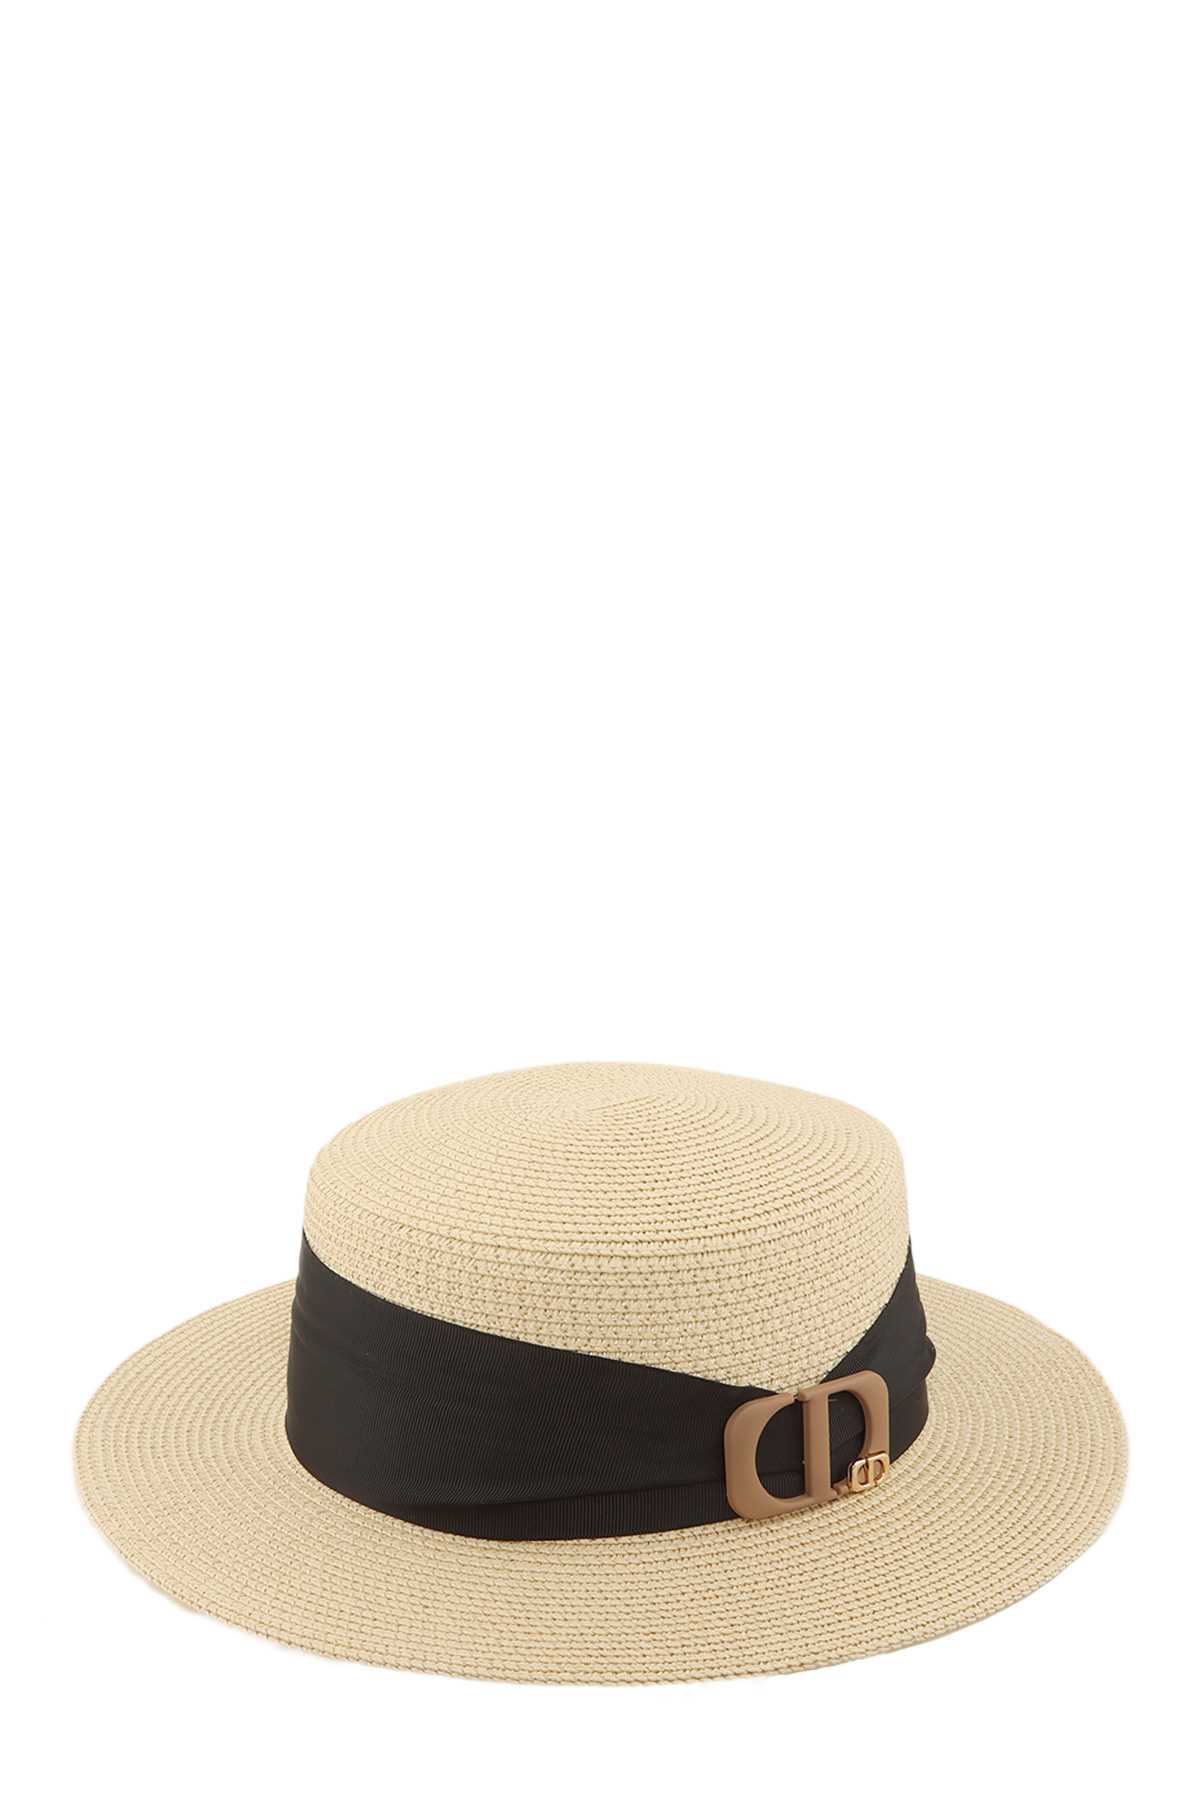 Straw Fashion Hat With CD Accent